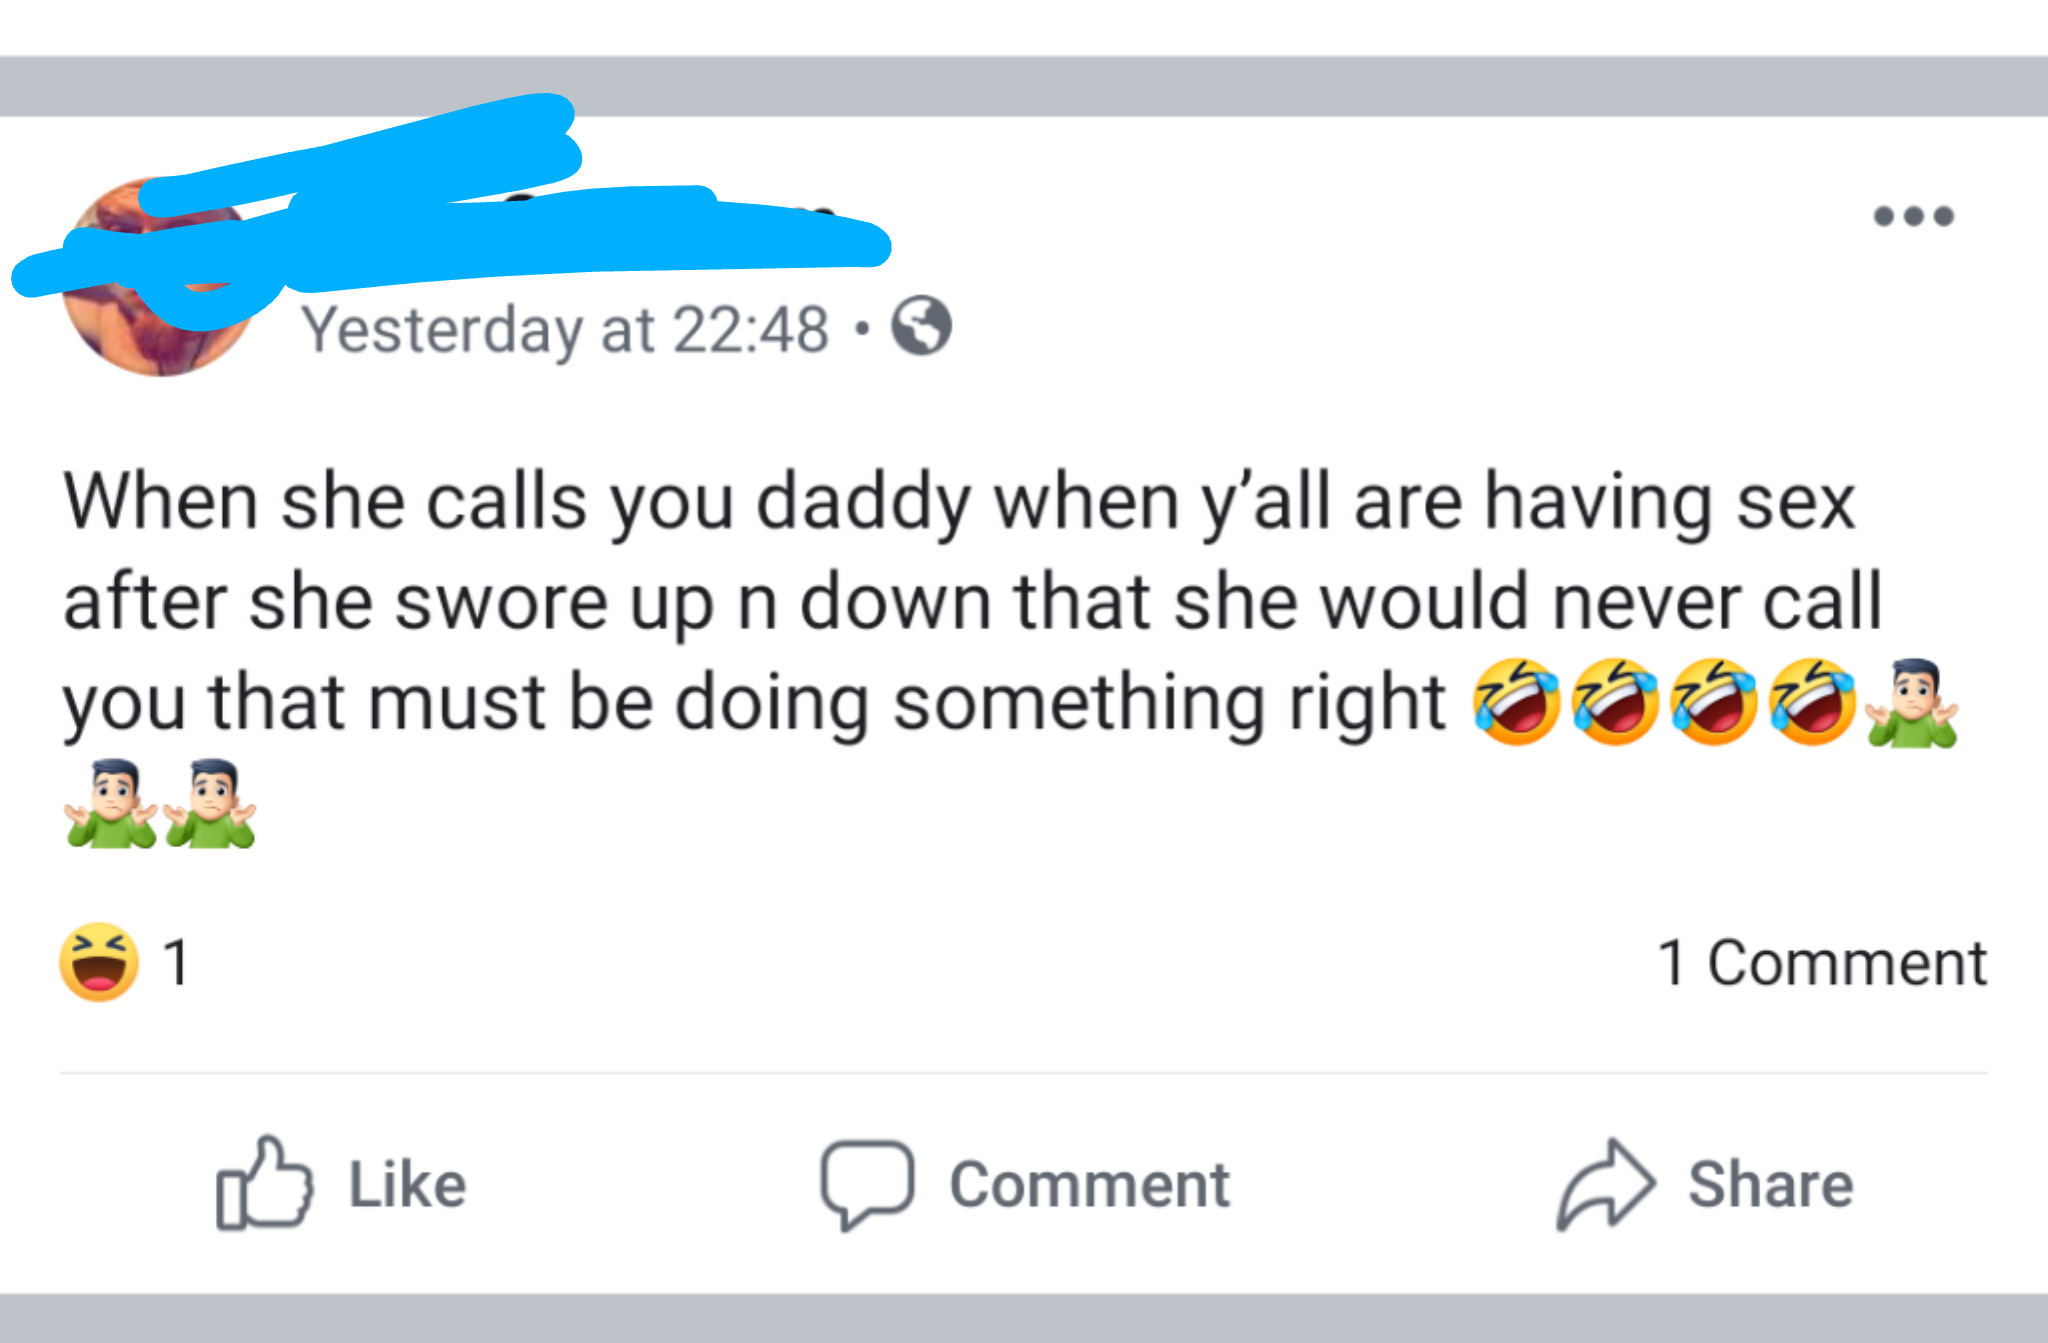 sex memes - Yesterday at When she calls you daddy when y'all are having sex after she swore up n down that she would never call you that must be doing something right 1 Comment Comment